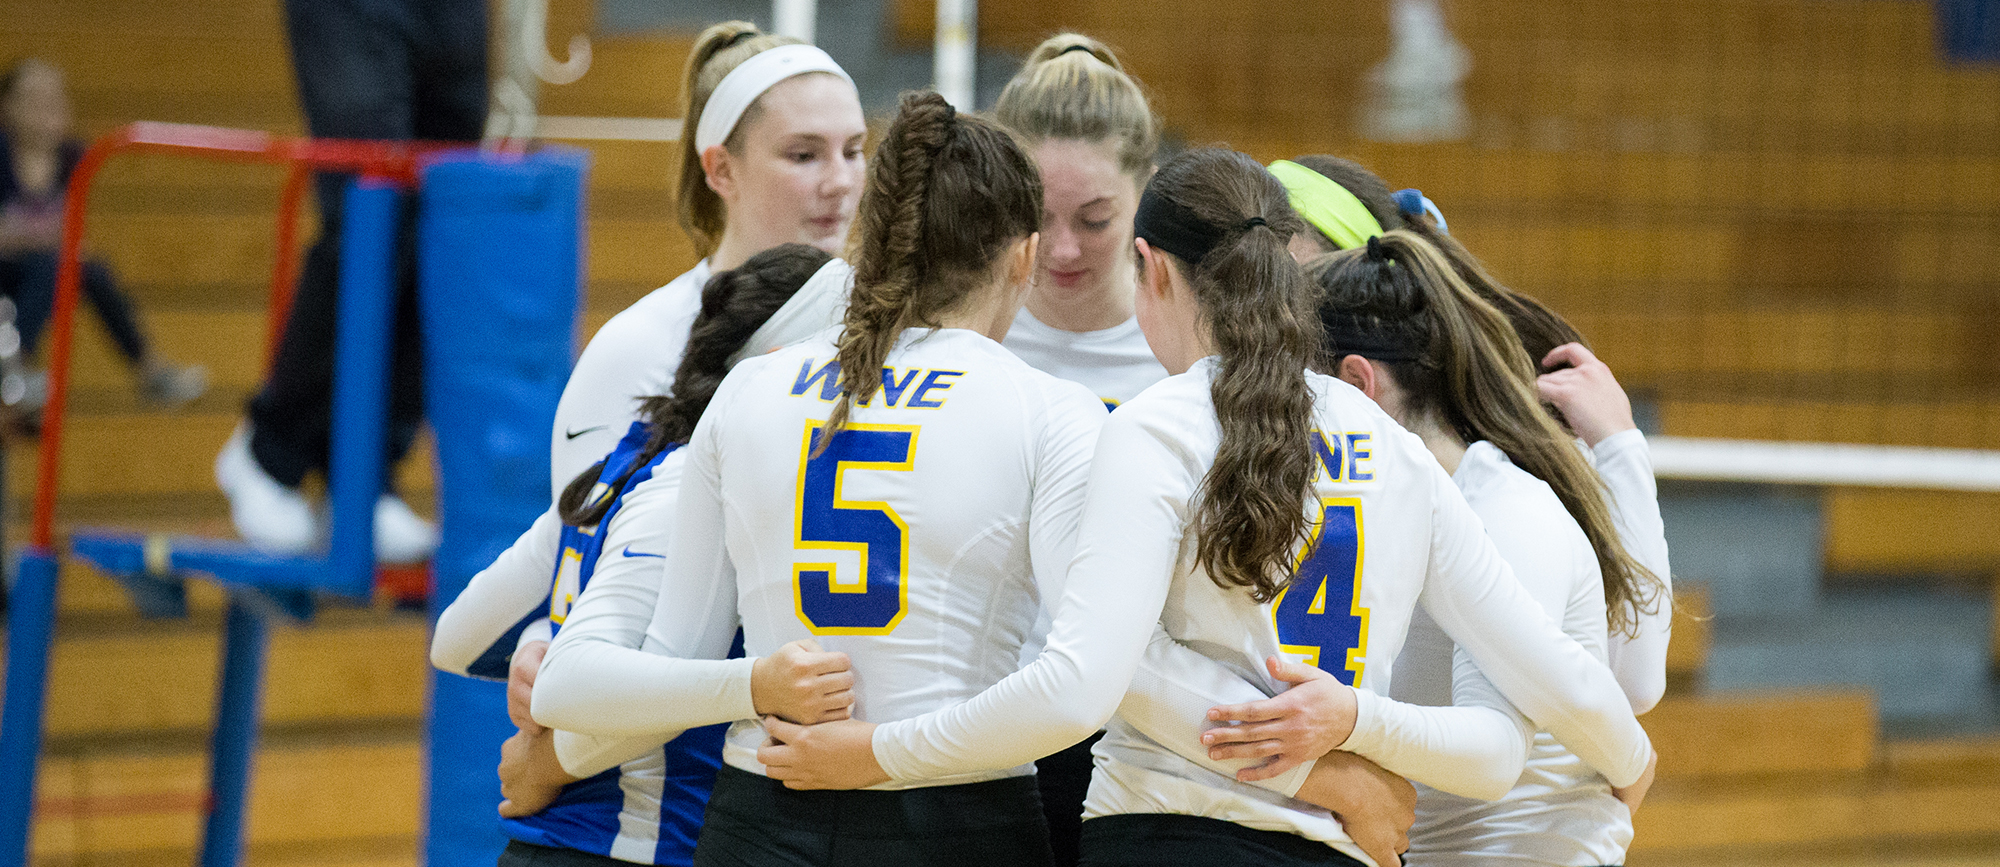 Golden Bears Fall to Wentworth in CCC Quarterfinals, 3-2